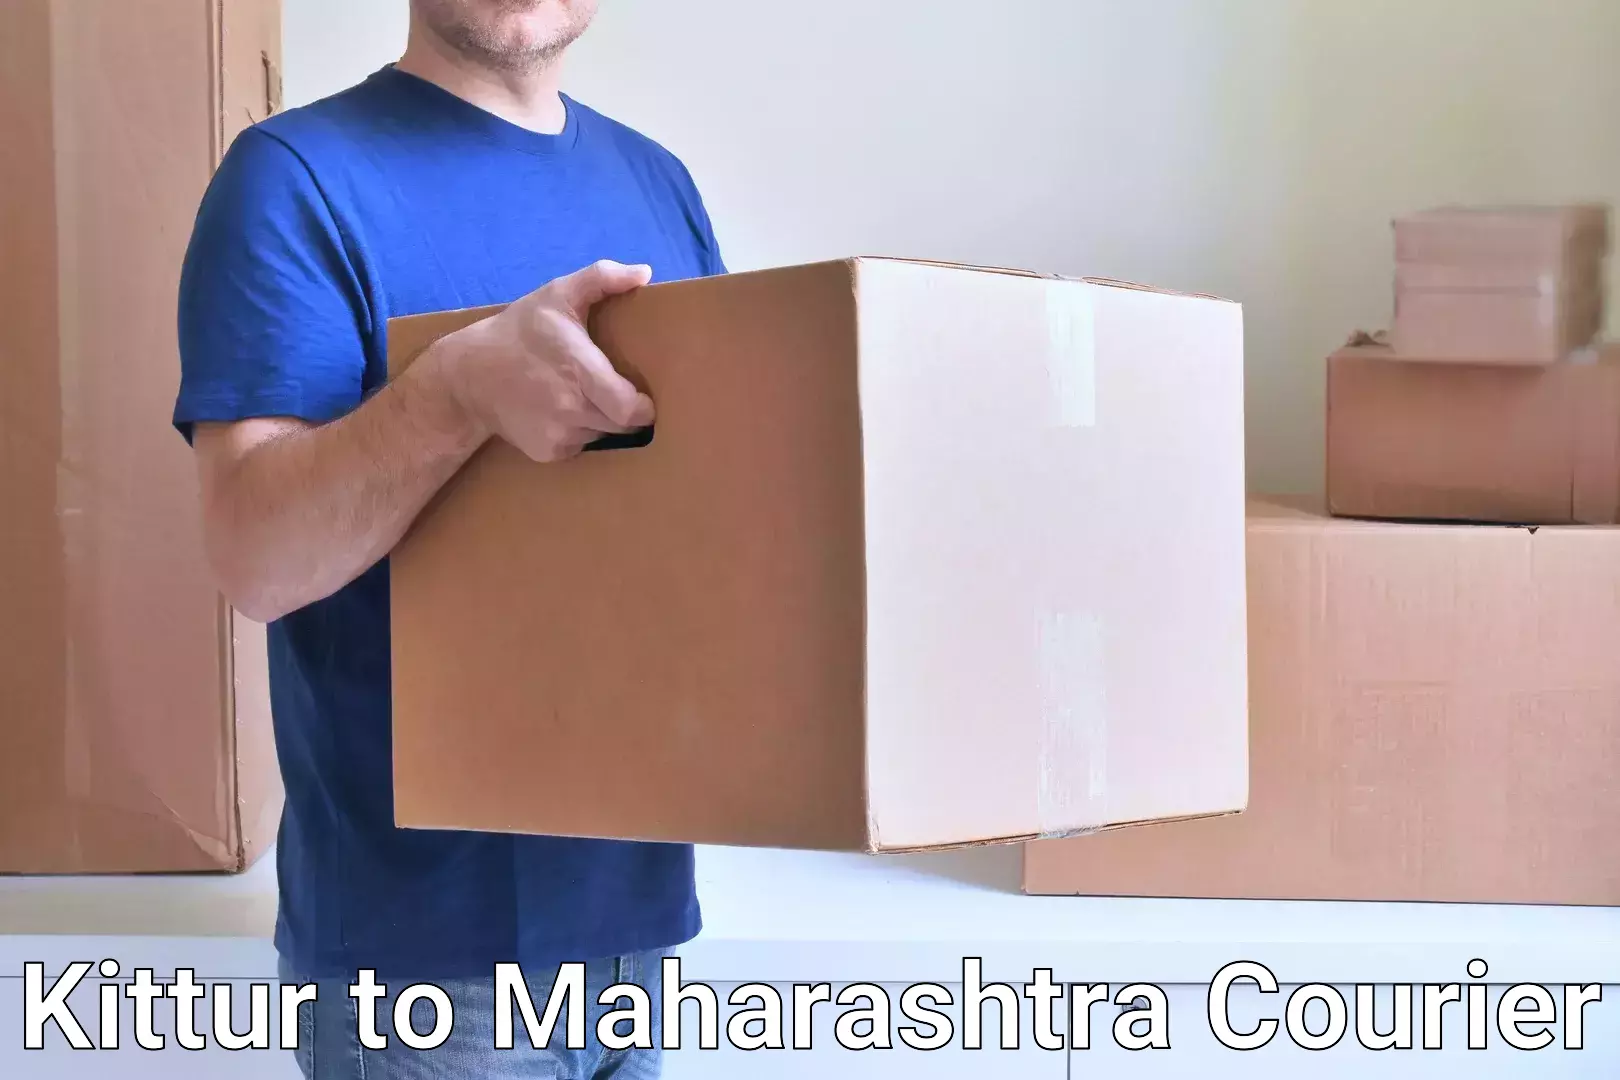 Multi-service courier options Kittur to Shirpur